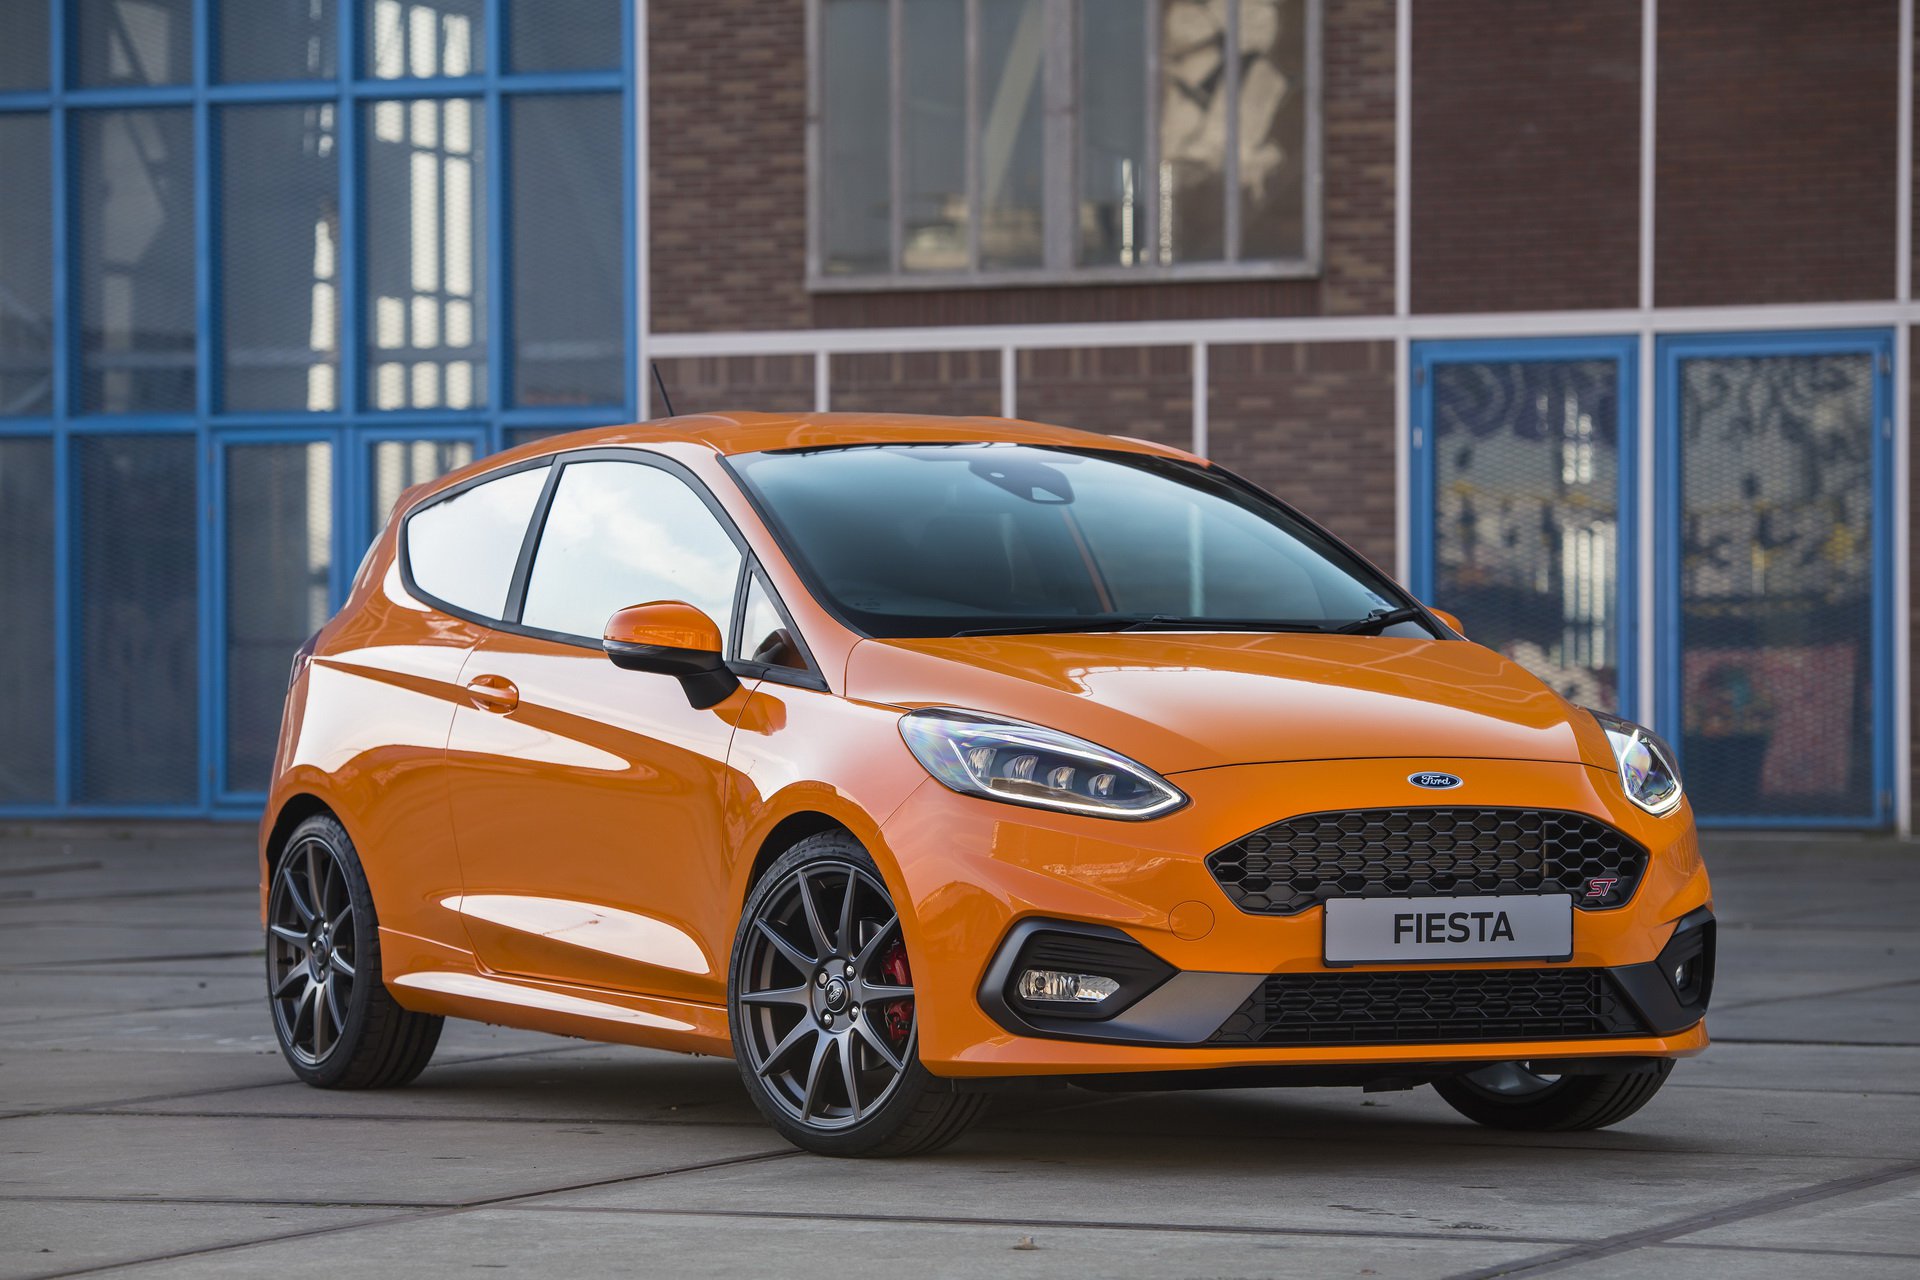 The Ford Focus ST A Used Hot Hatch That Shouldnt Be Overlooked